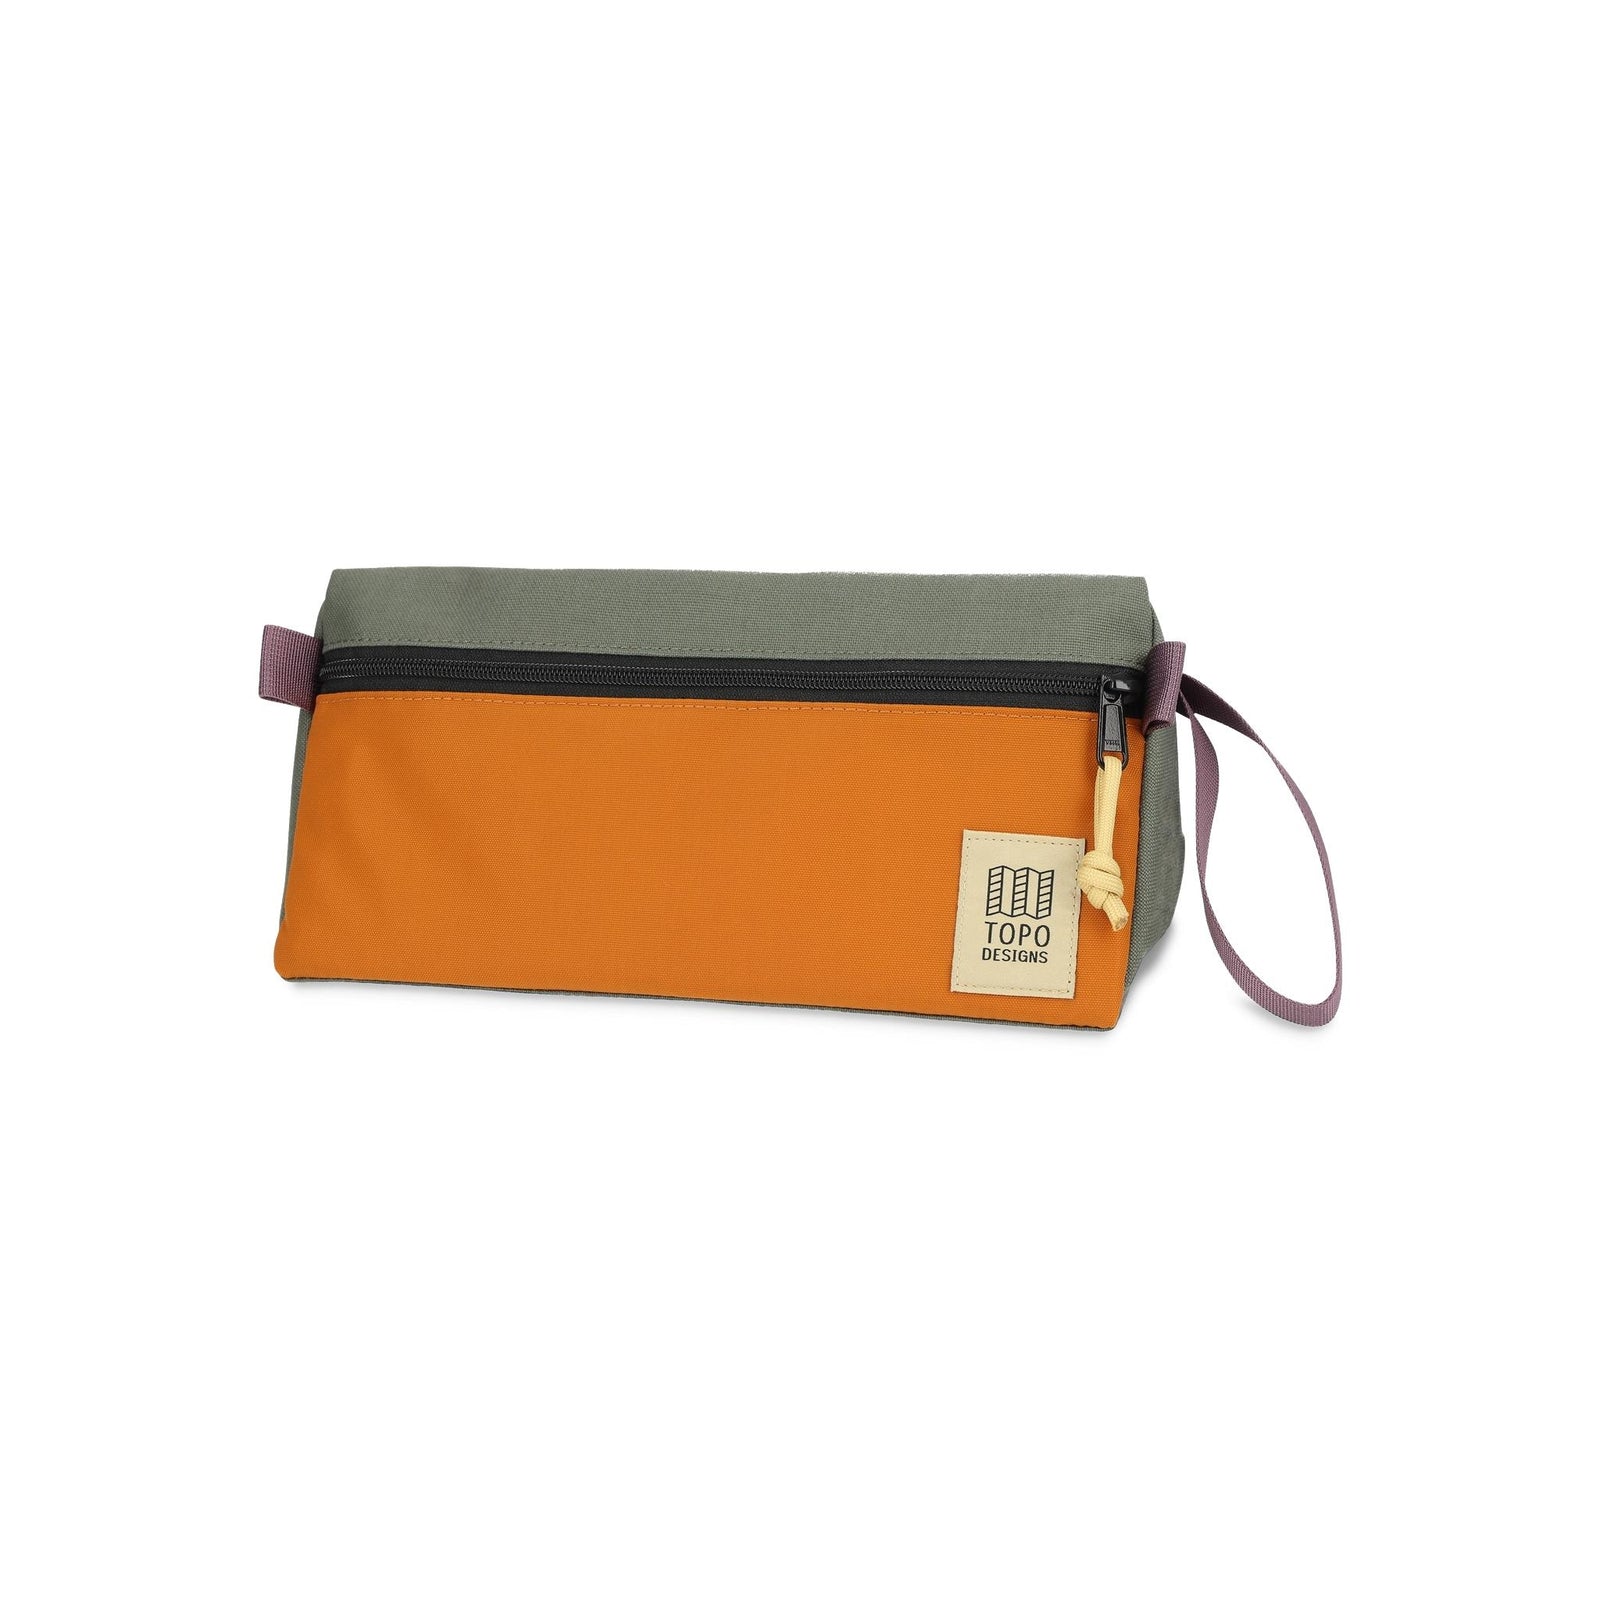 Front View of Topo Designs Dopp Kit in "Beetle / Spice"